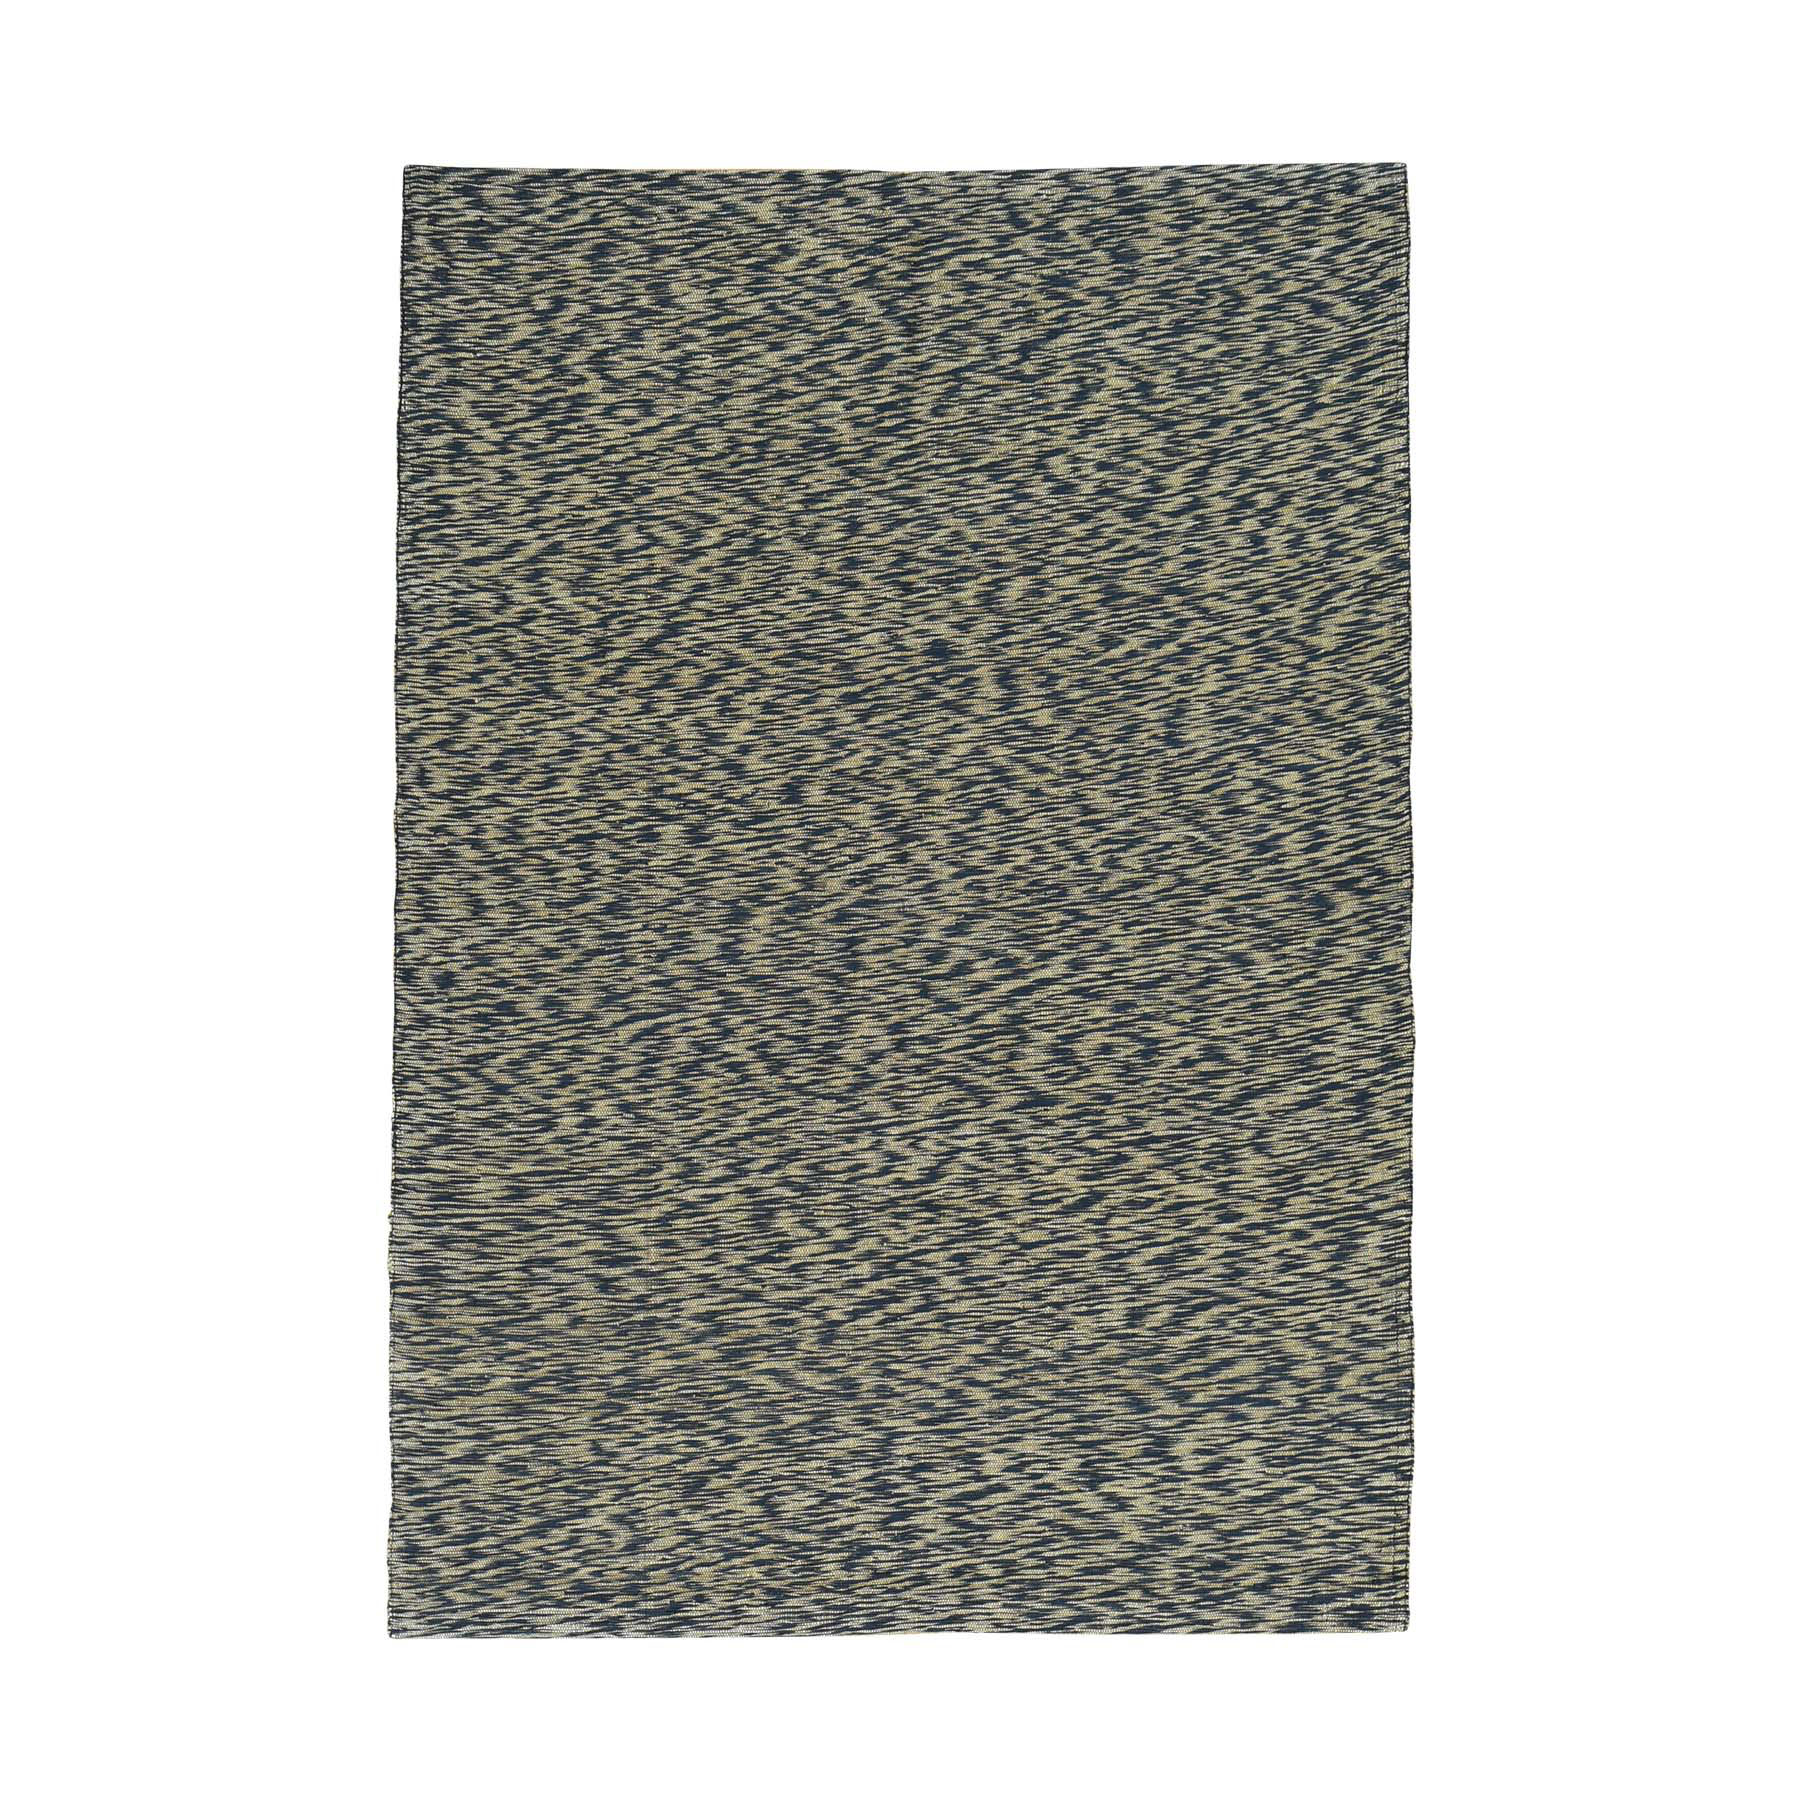 4'6"x6'6" On Clearance Pure Wool Leather Chain Stitch Modern Hand-Woven Oriental Rug 